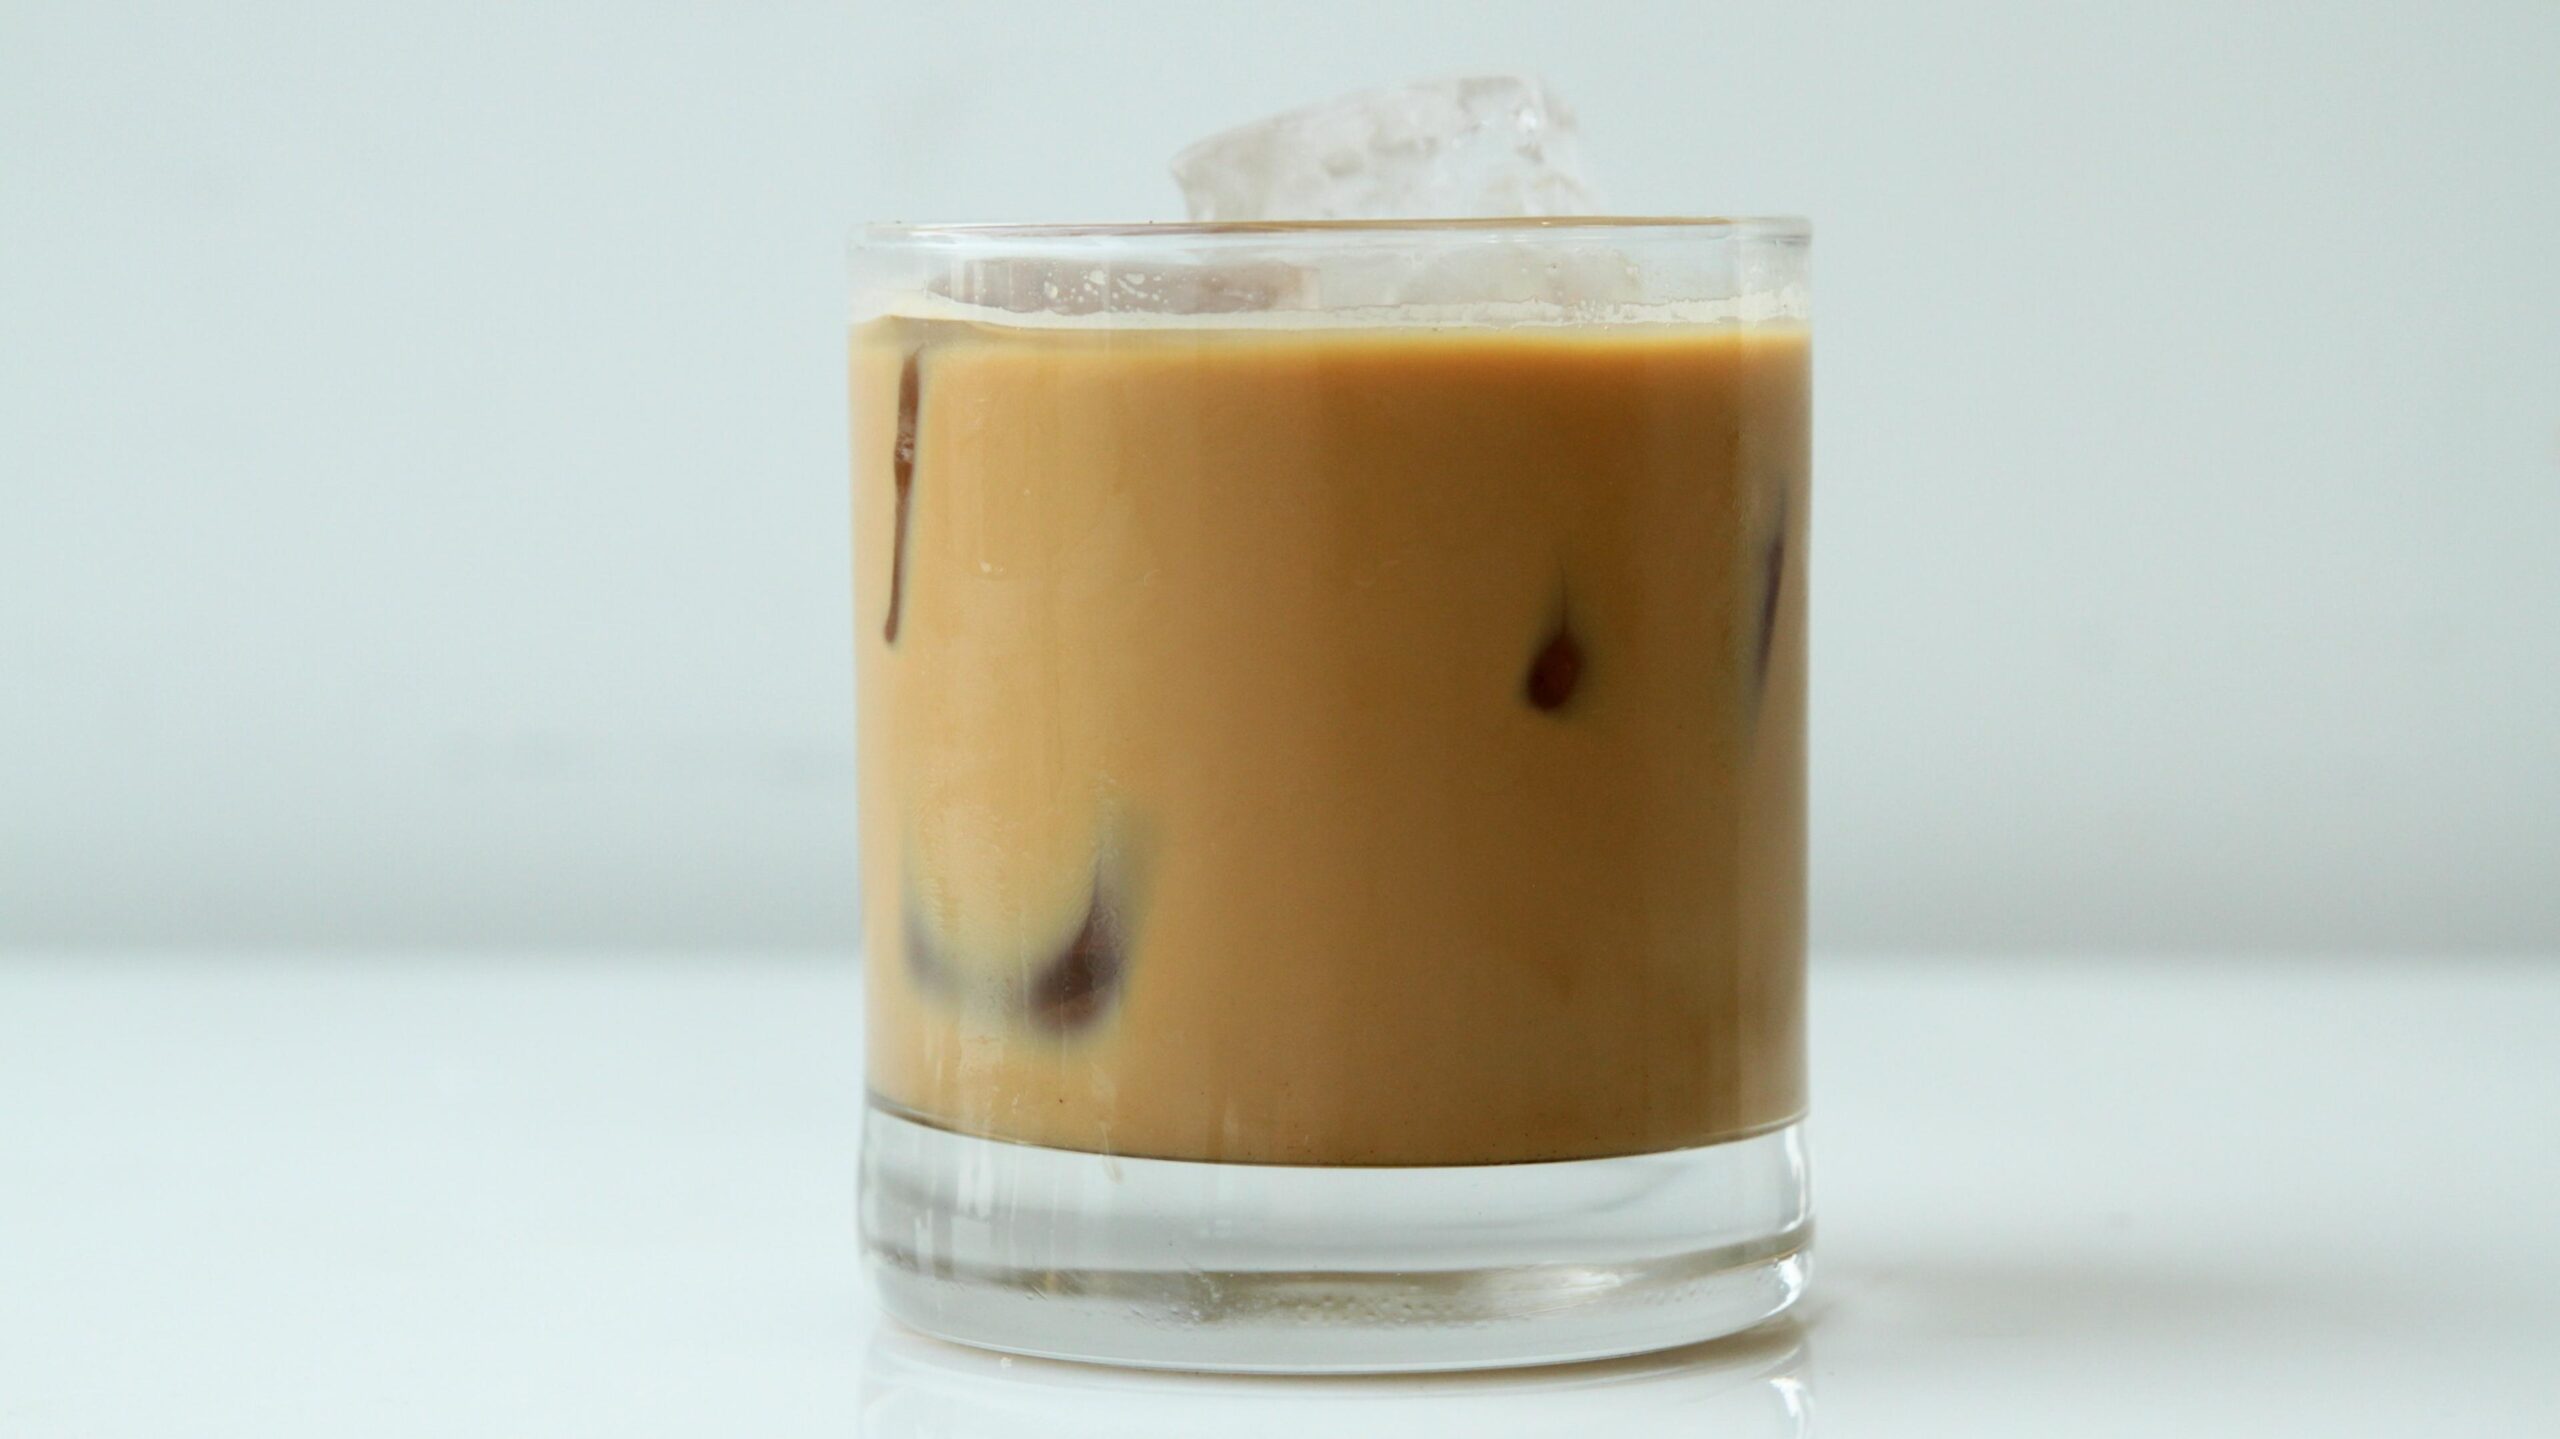  Stay cool and caffeinated with every sip of this iced espresso.